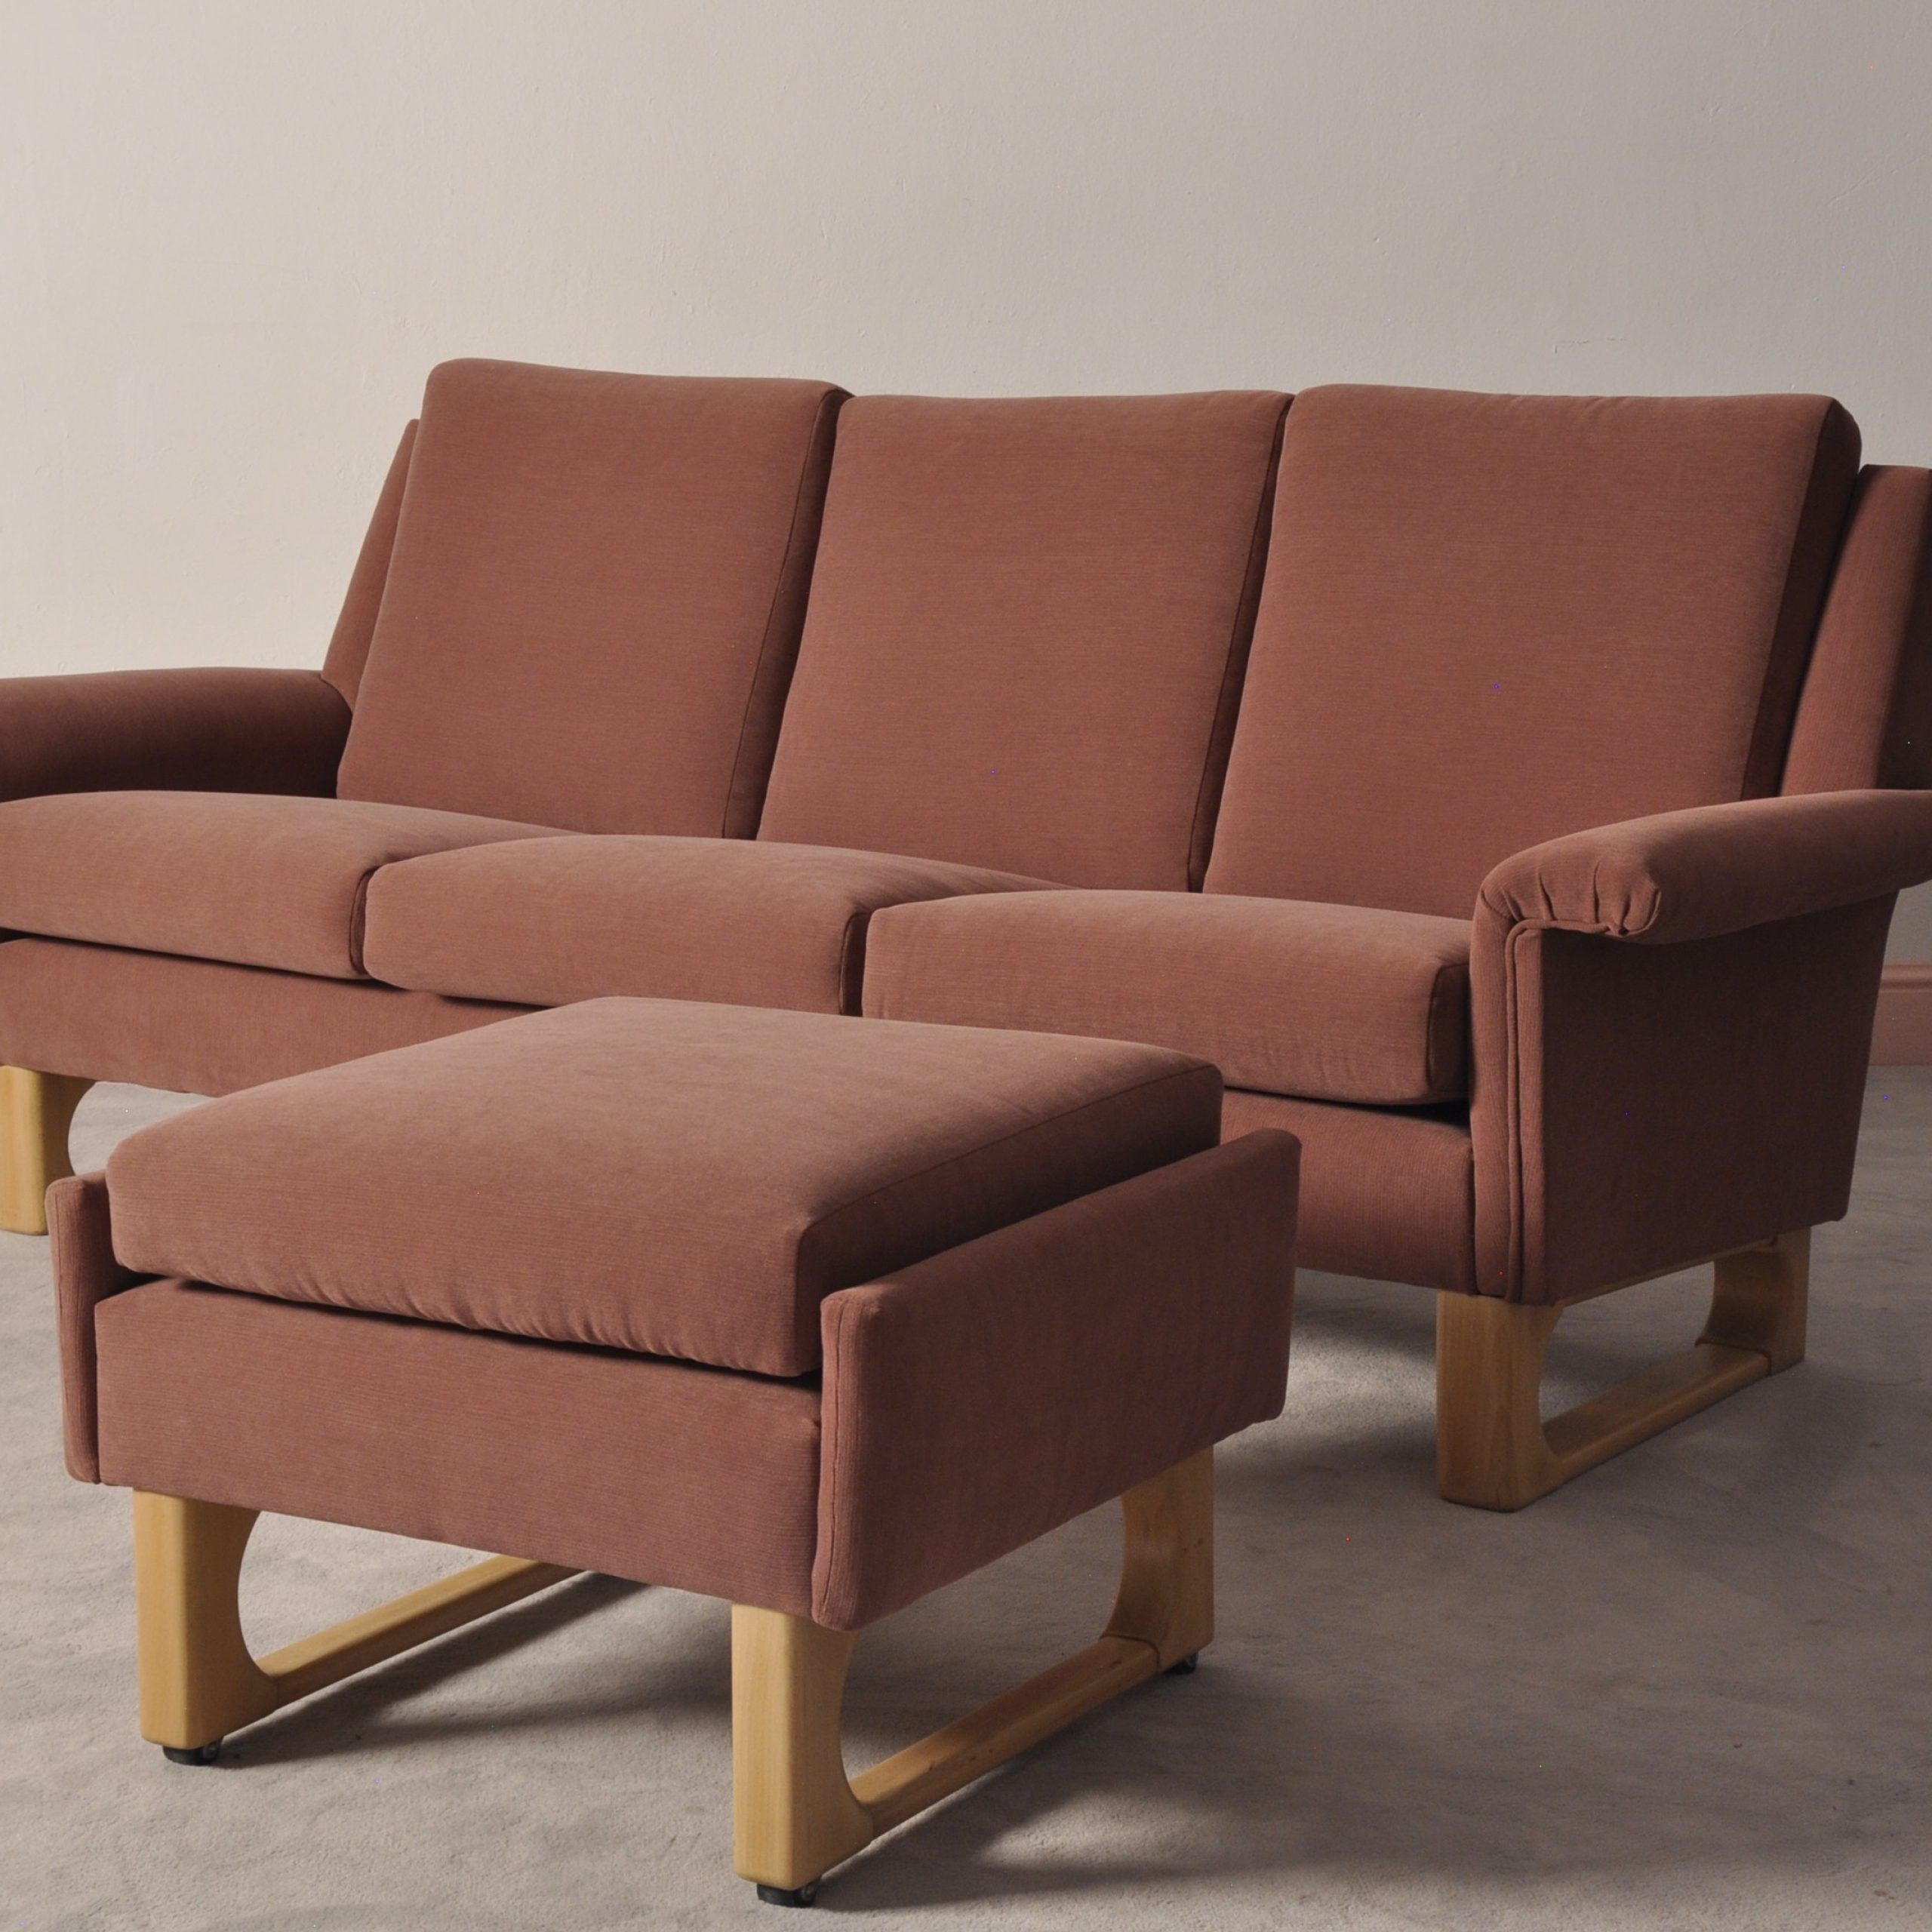 Scandinavian Mid Century 3 Seater Sofa & Ottoman – 1970s – Design Market Intended For Mid Century 3 Seat Couches (View 11 of 20)